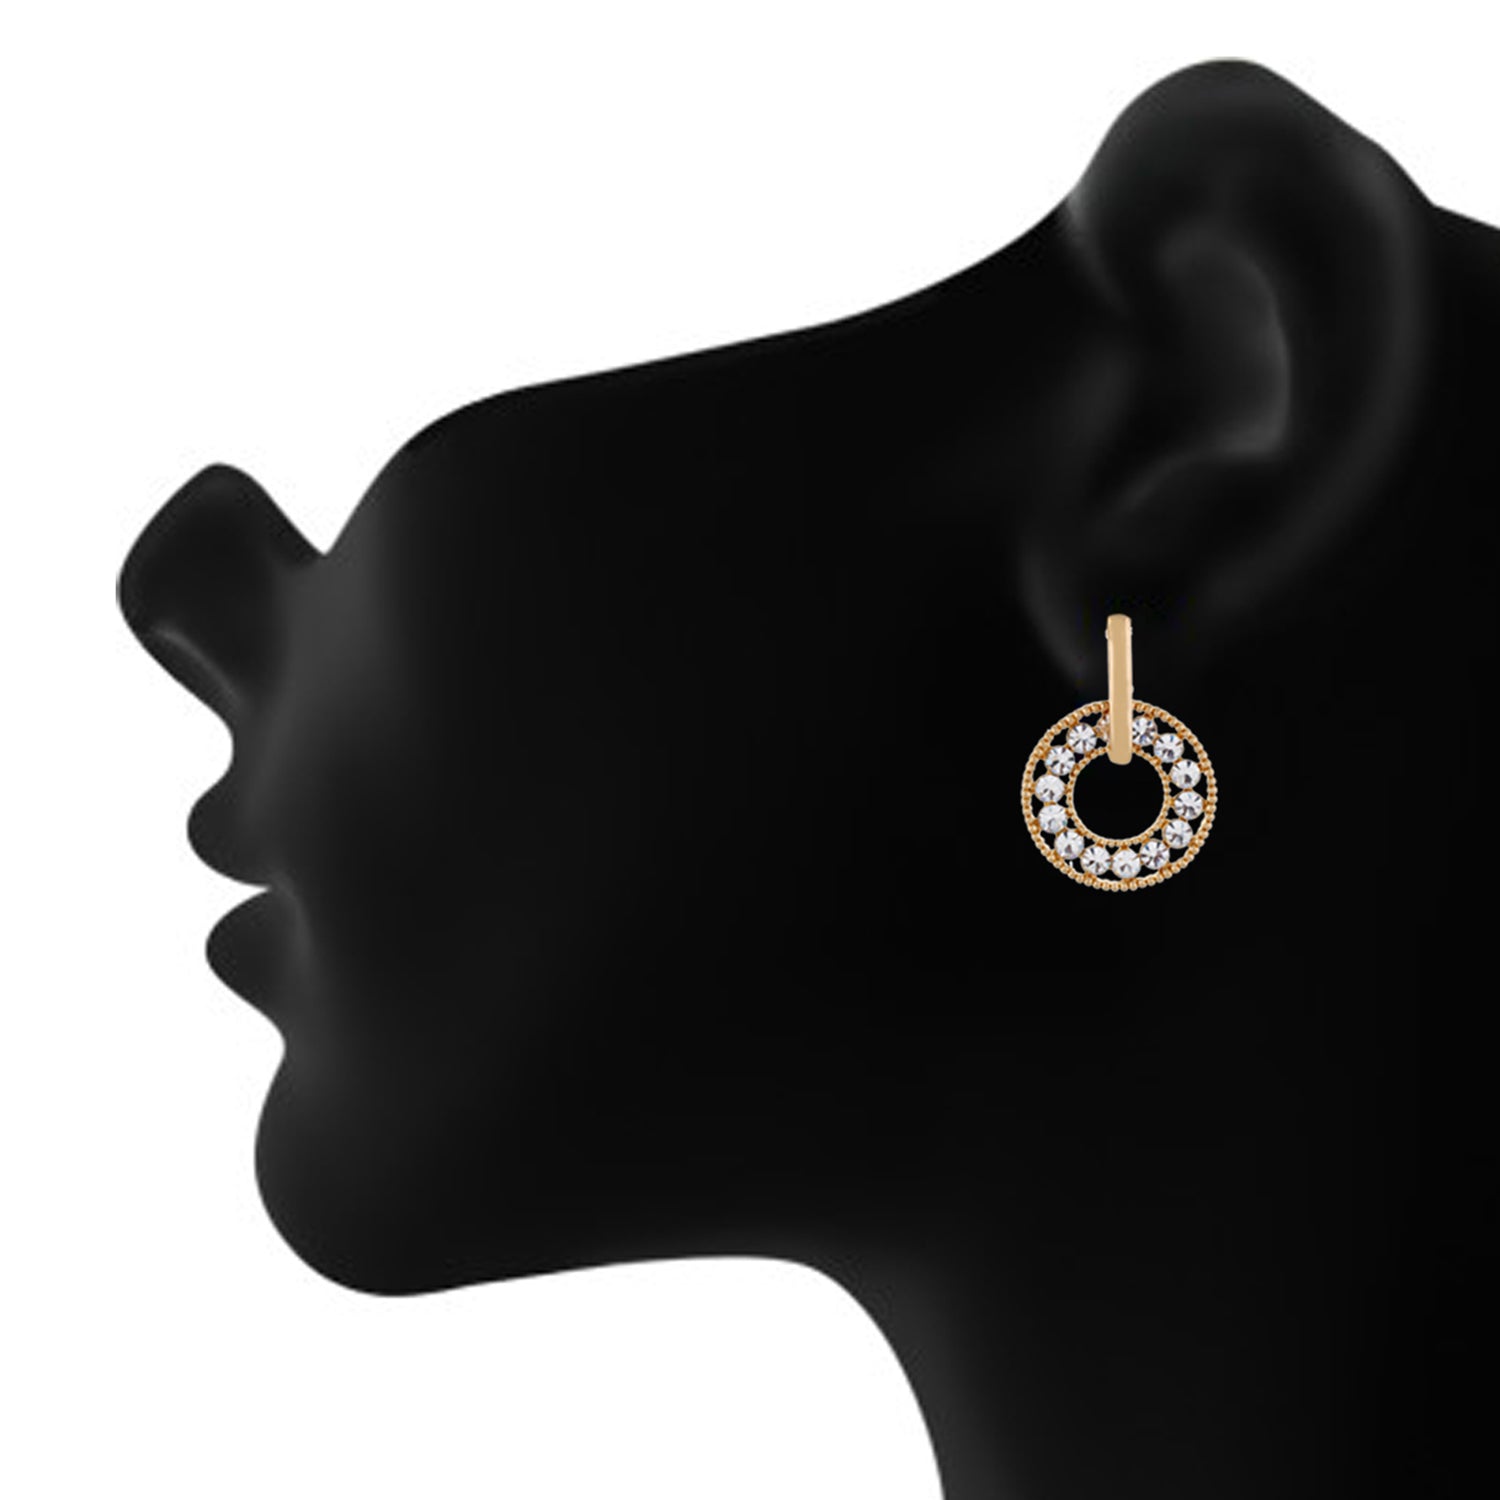 Gold colour Round Design Hanging Earrings for Girls and Women